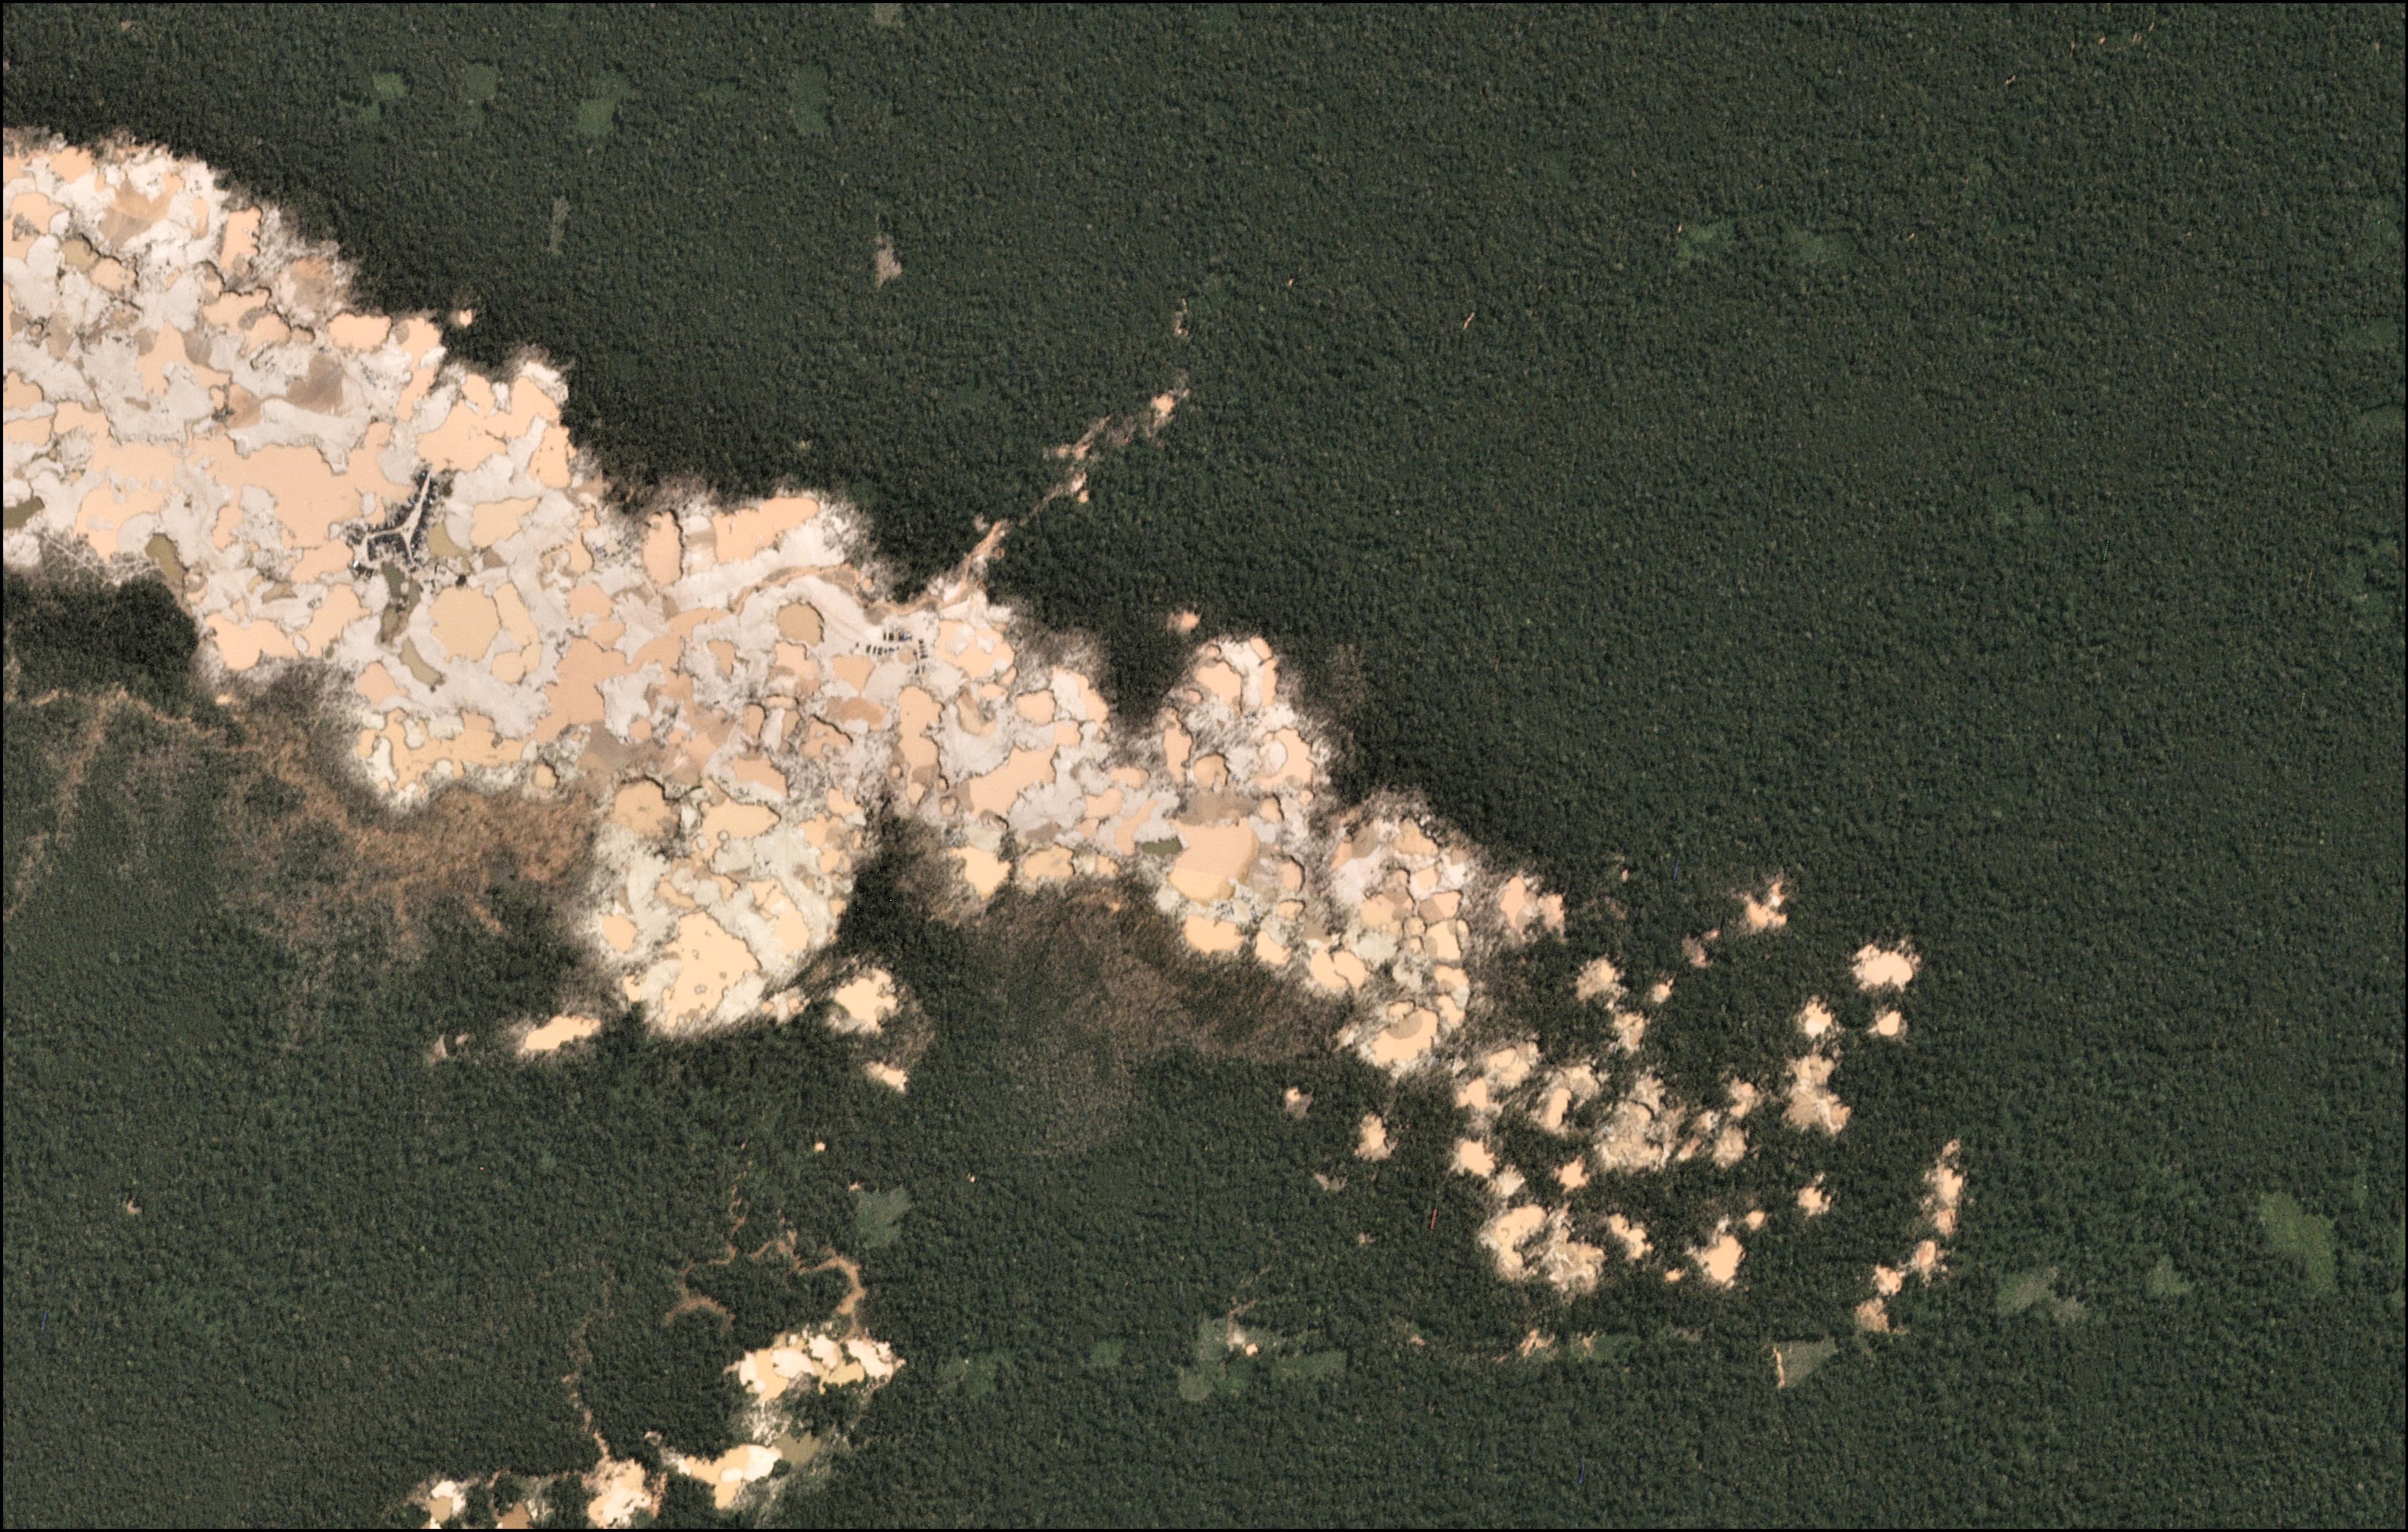 Gold mining deforestation is seen from a satellite image in the southern Amazon region of Madre de Dios